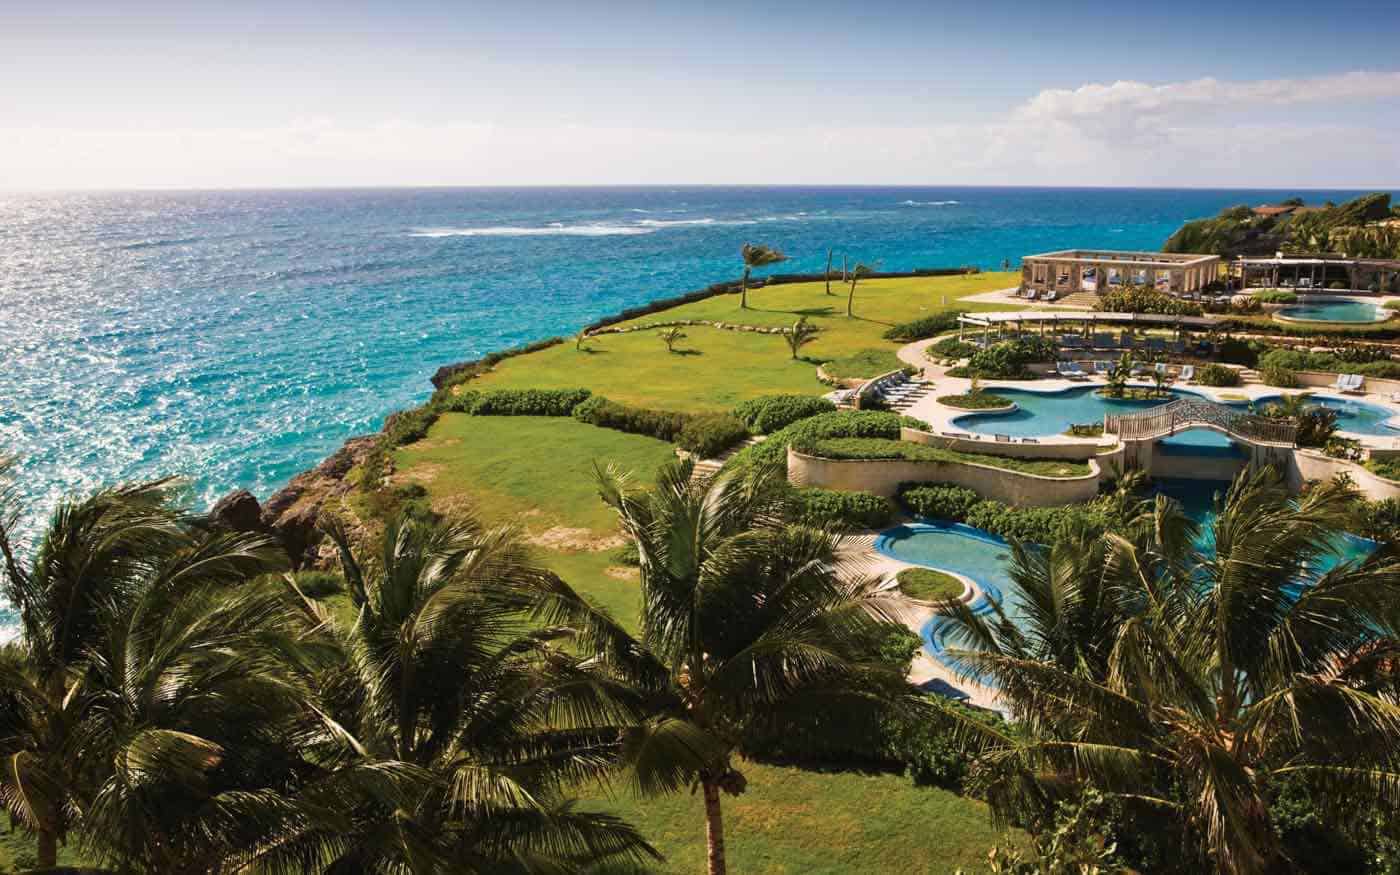 Hilton Grand Vacations: Bucket List Travel You Never Knew Possible With a Timeshare